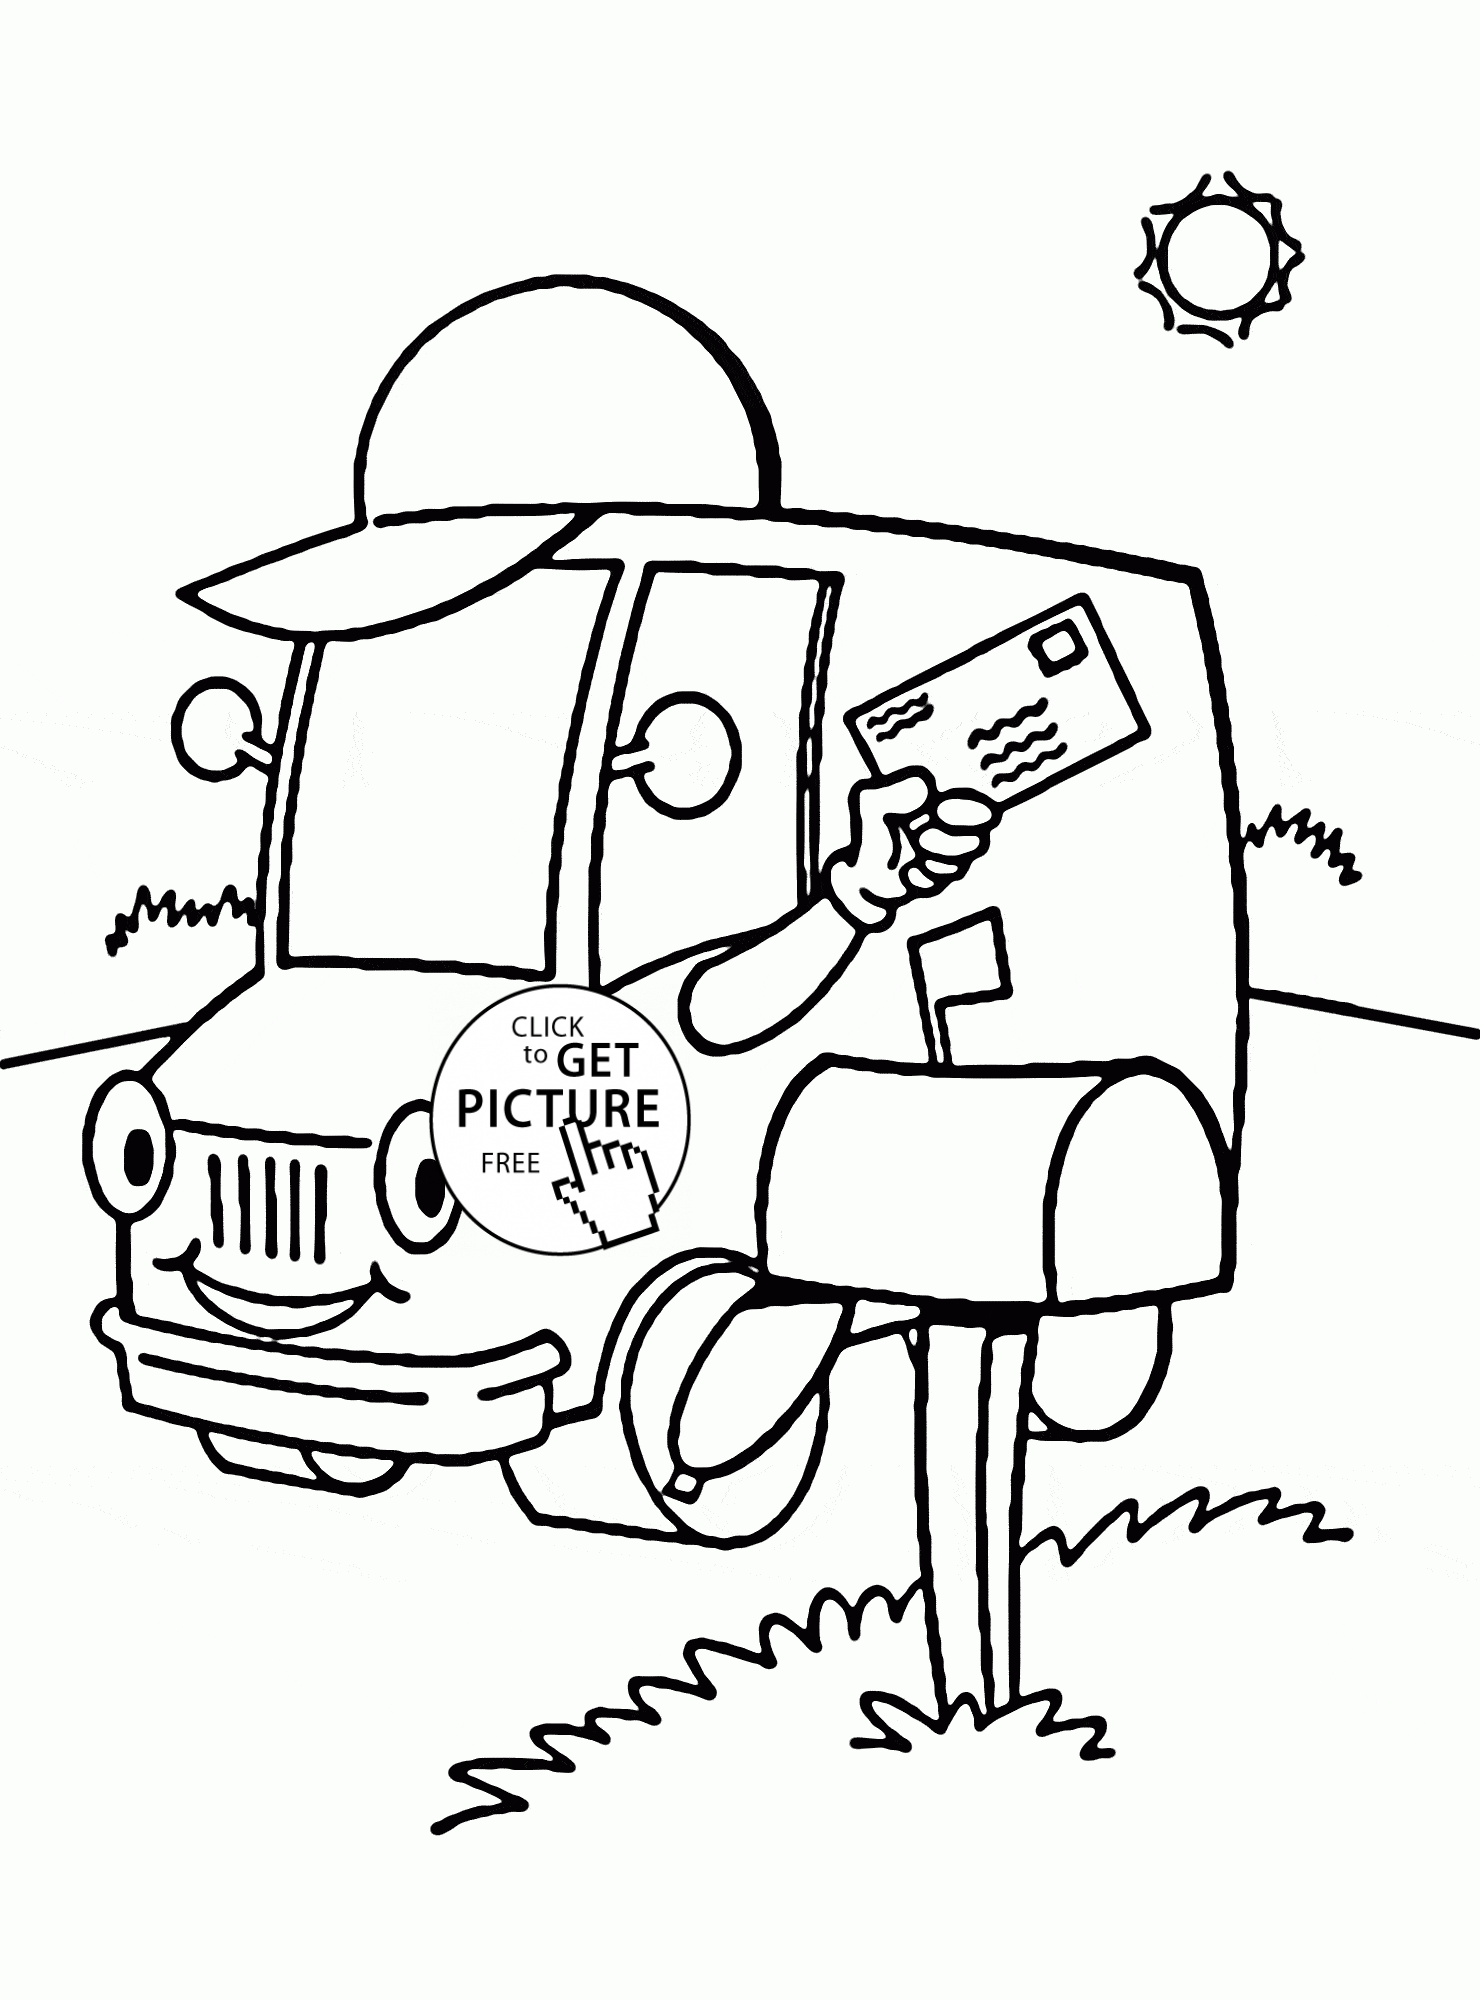 Post truck coloring page for kids transportation coloring pages printables free